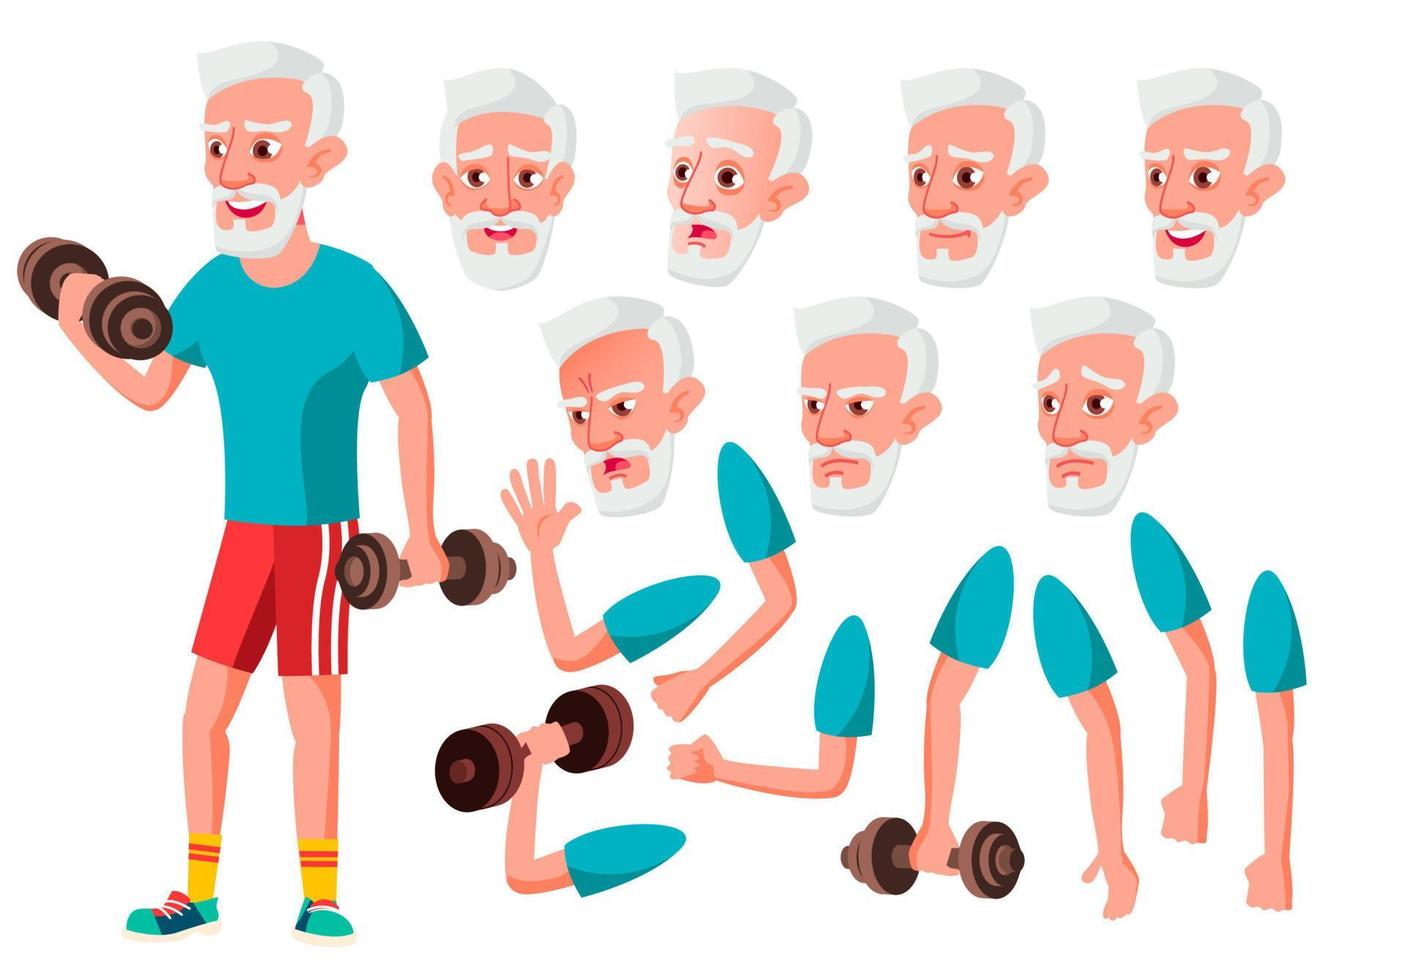 Old Man Vector. Senior Person. Aged, Elderly People. Cute, Comic. Joy. Face Emotions, Various Gestures. Animation Creation Set. Isolated Flat Cartoon Character Illustration vector